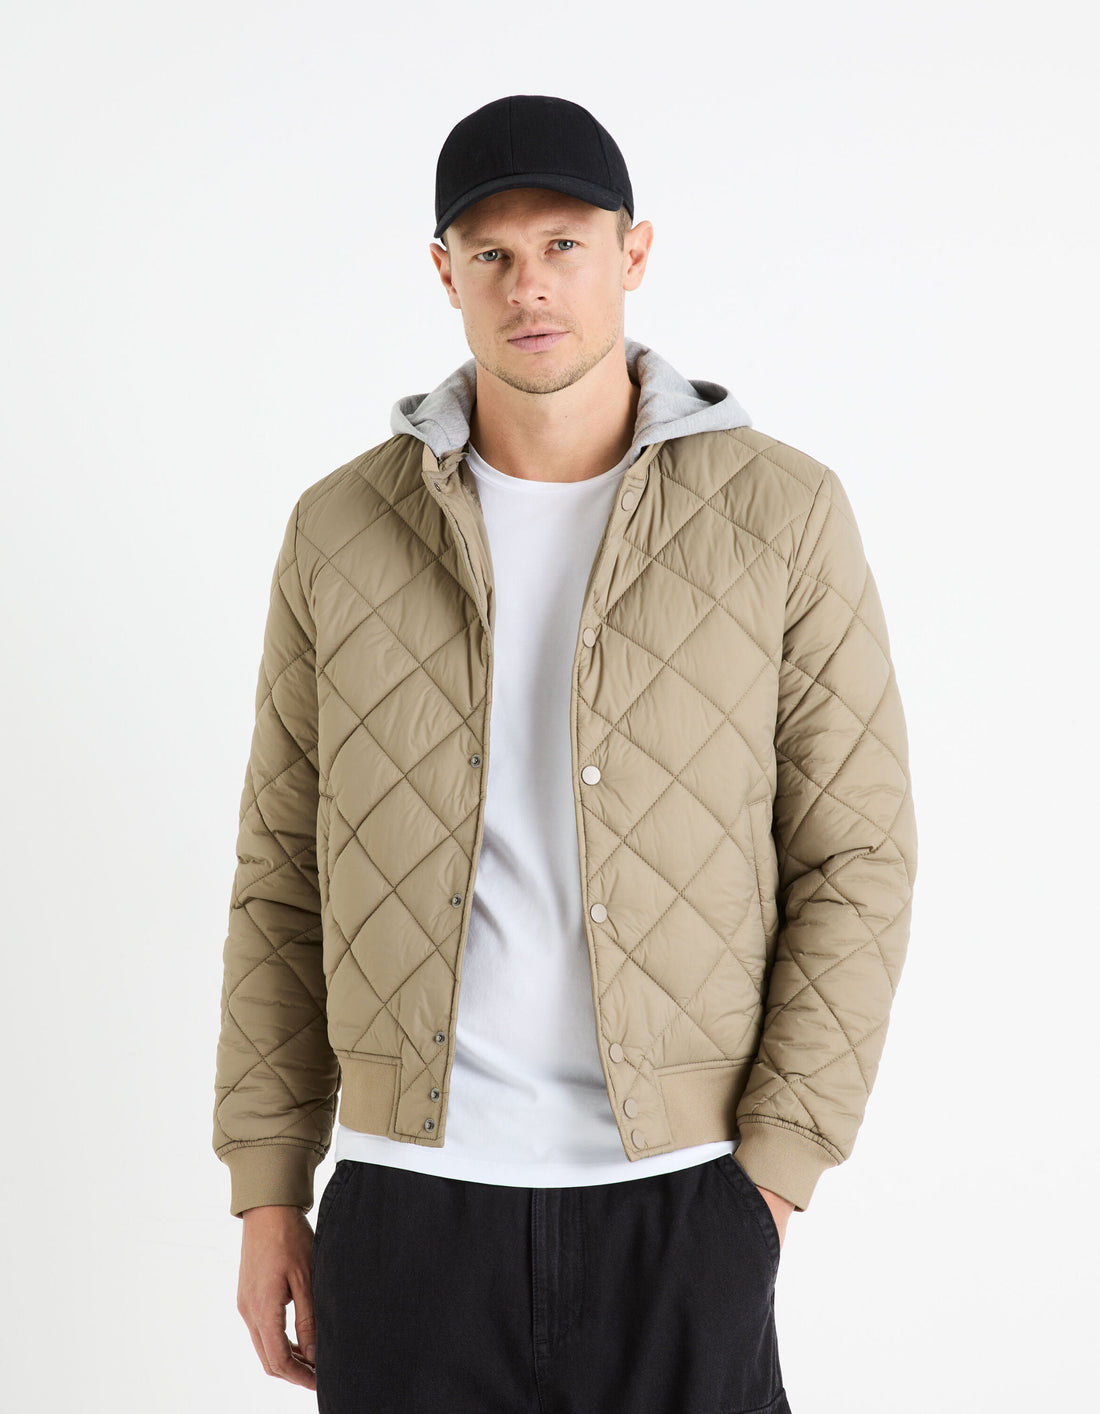 Hooded Bomber Jacket_FUQUILTED_BEIGE_01